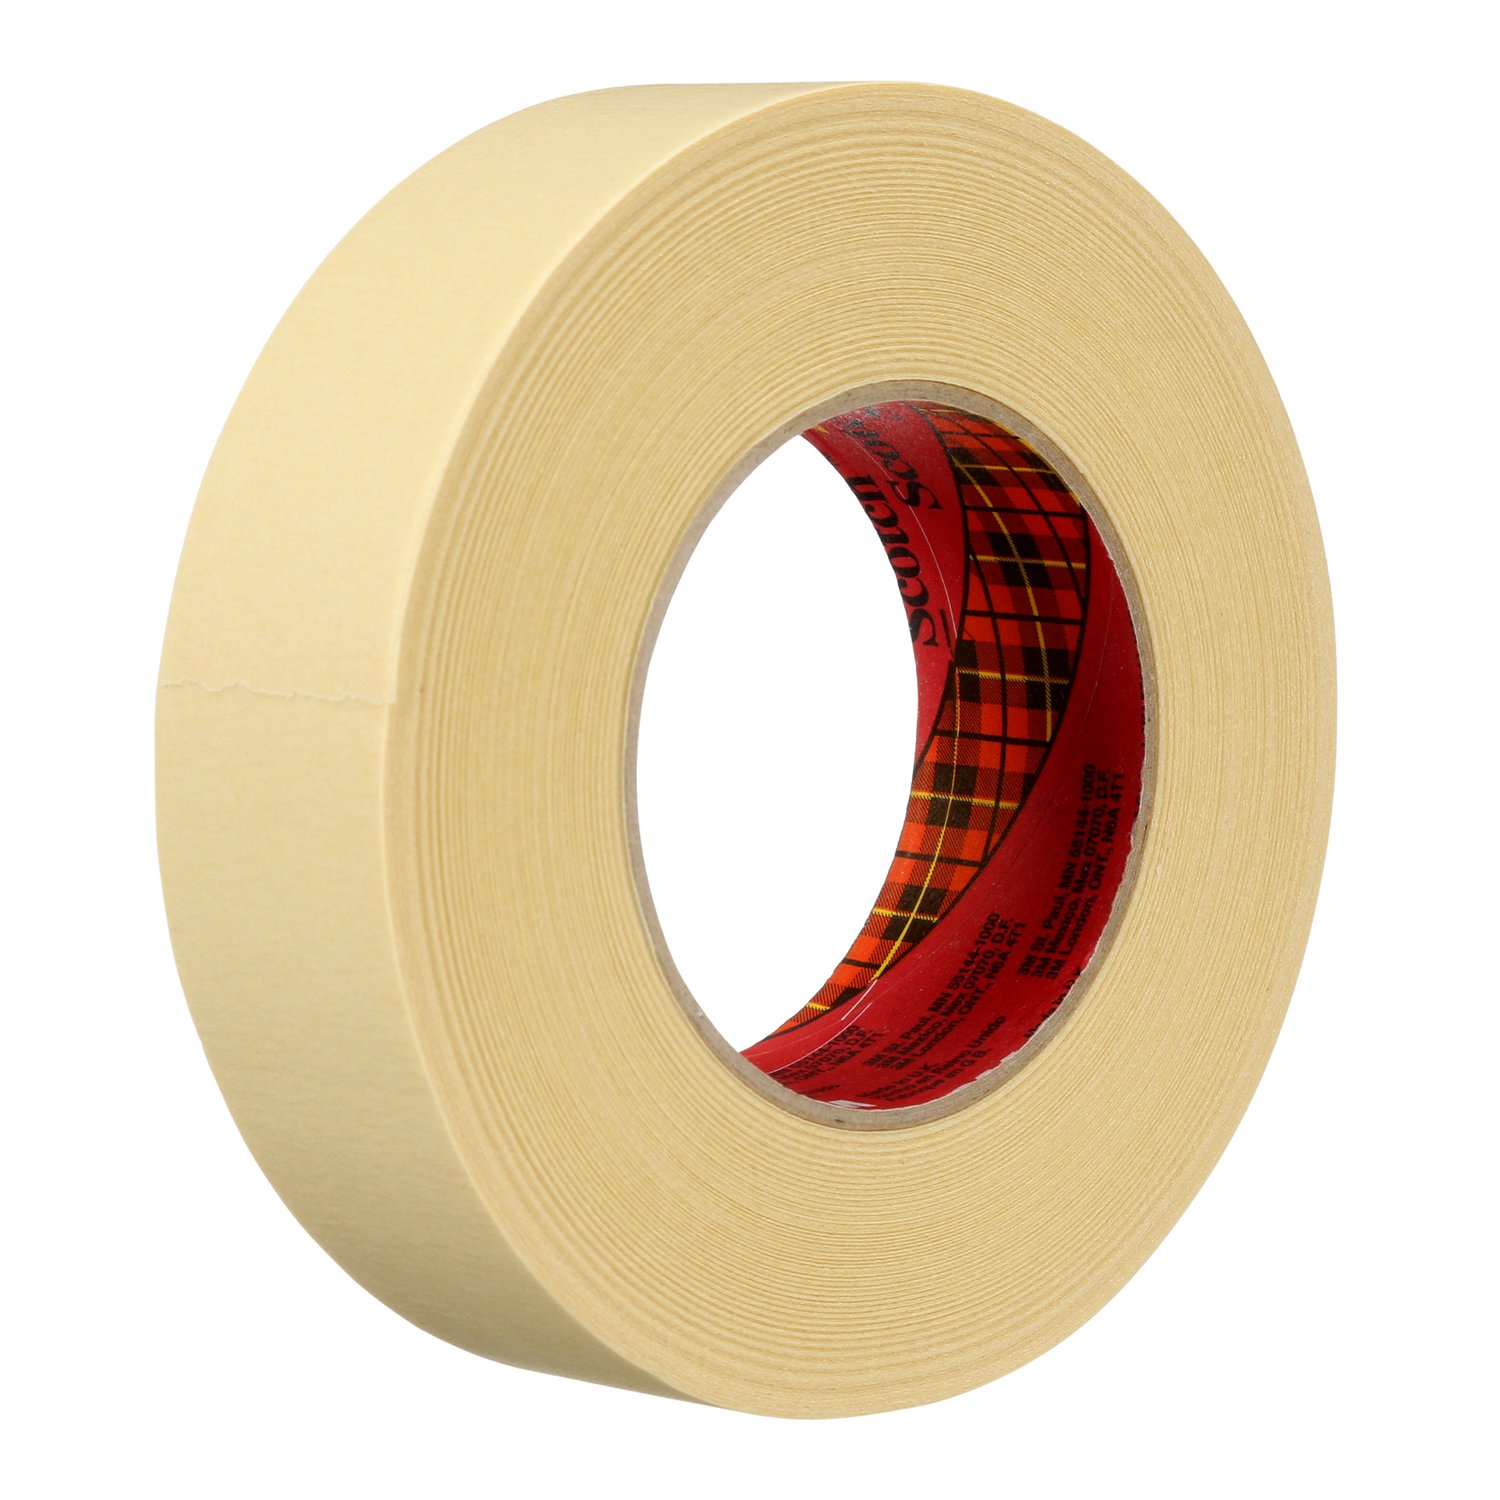 7000088380, 3M High Performance Masking Tape 2693, Tan, 36 mm x 55 m, 7.9  mil, 24 Rolls/Case, Aircraft product, Masking-Tapes